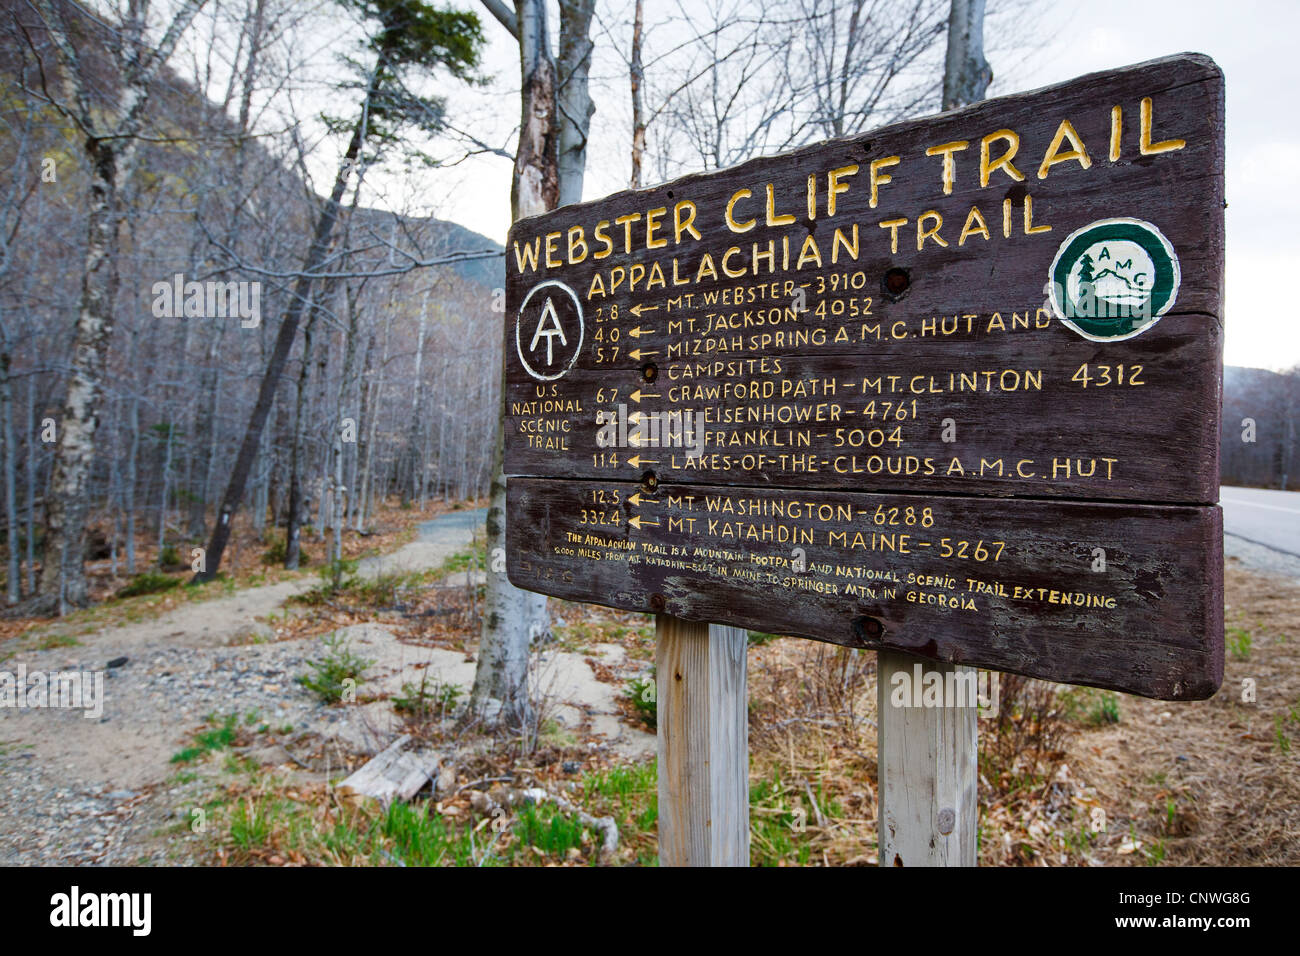 Crawford Notch State Park - Appalachian Trail at the Route 302 crossing in the White Mountains, New Hampshire USA Stock Photo